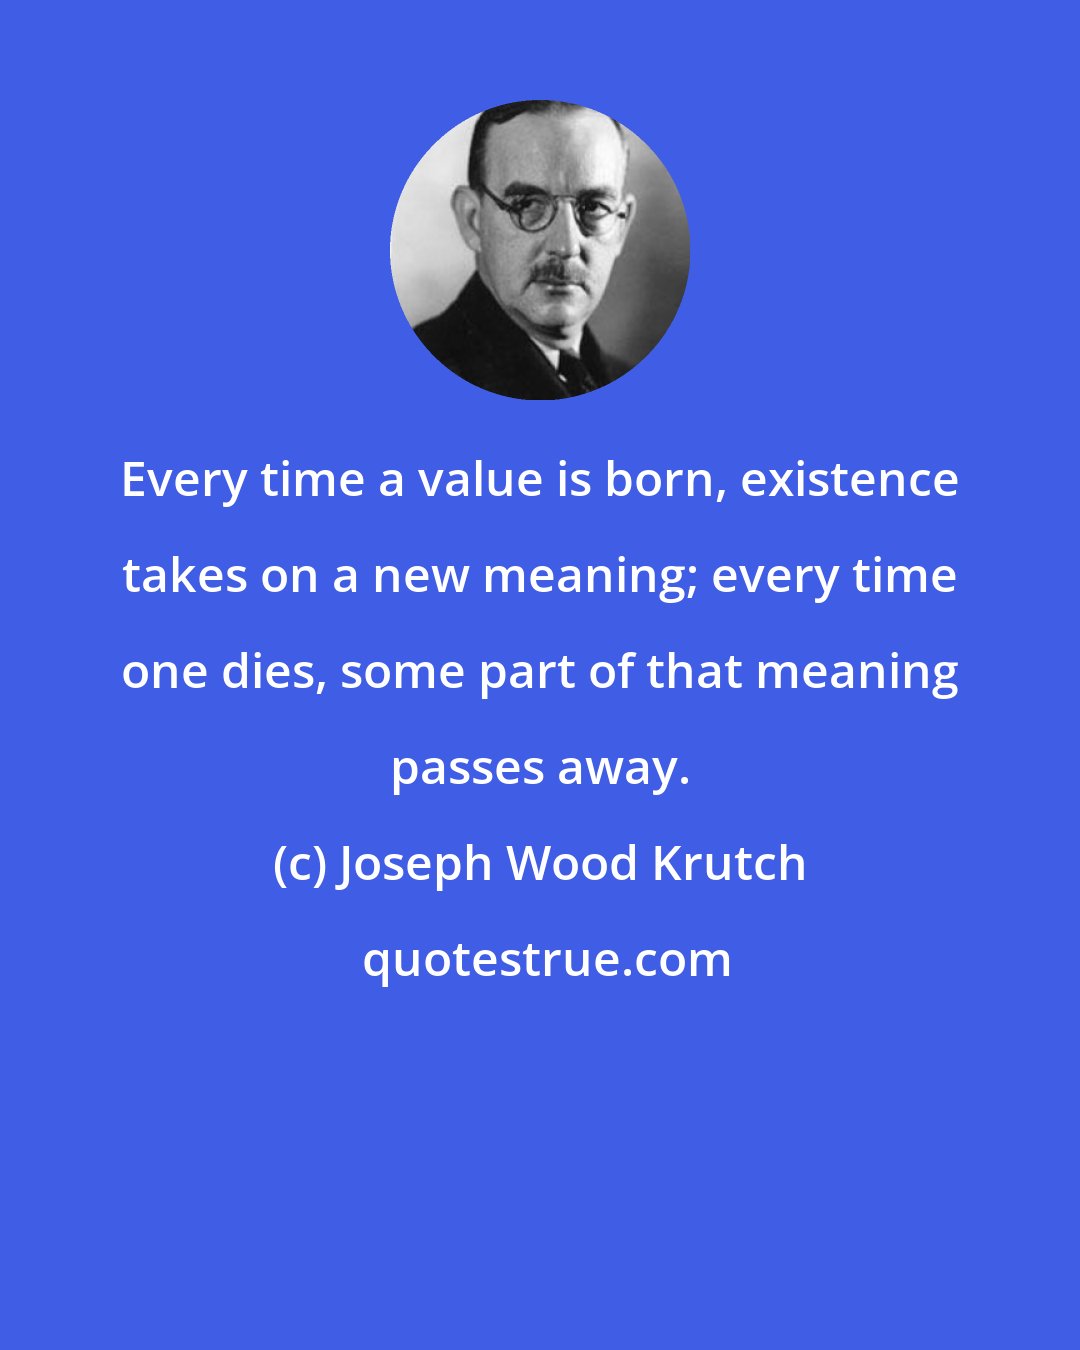 Joseph Wood Krutch: Every time a value is born, existence takes on a new meaning; every time one dies, some part of that meaning passes away.